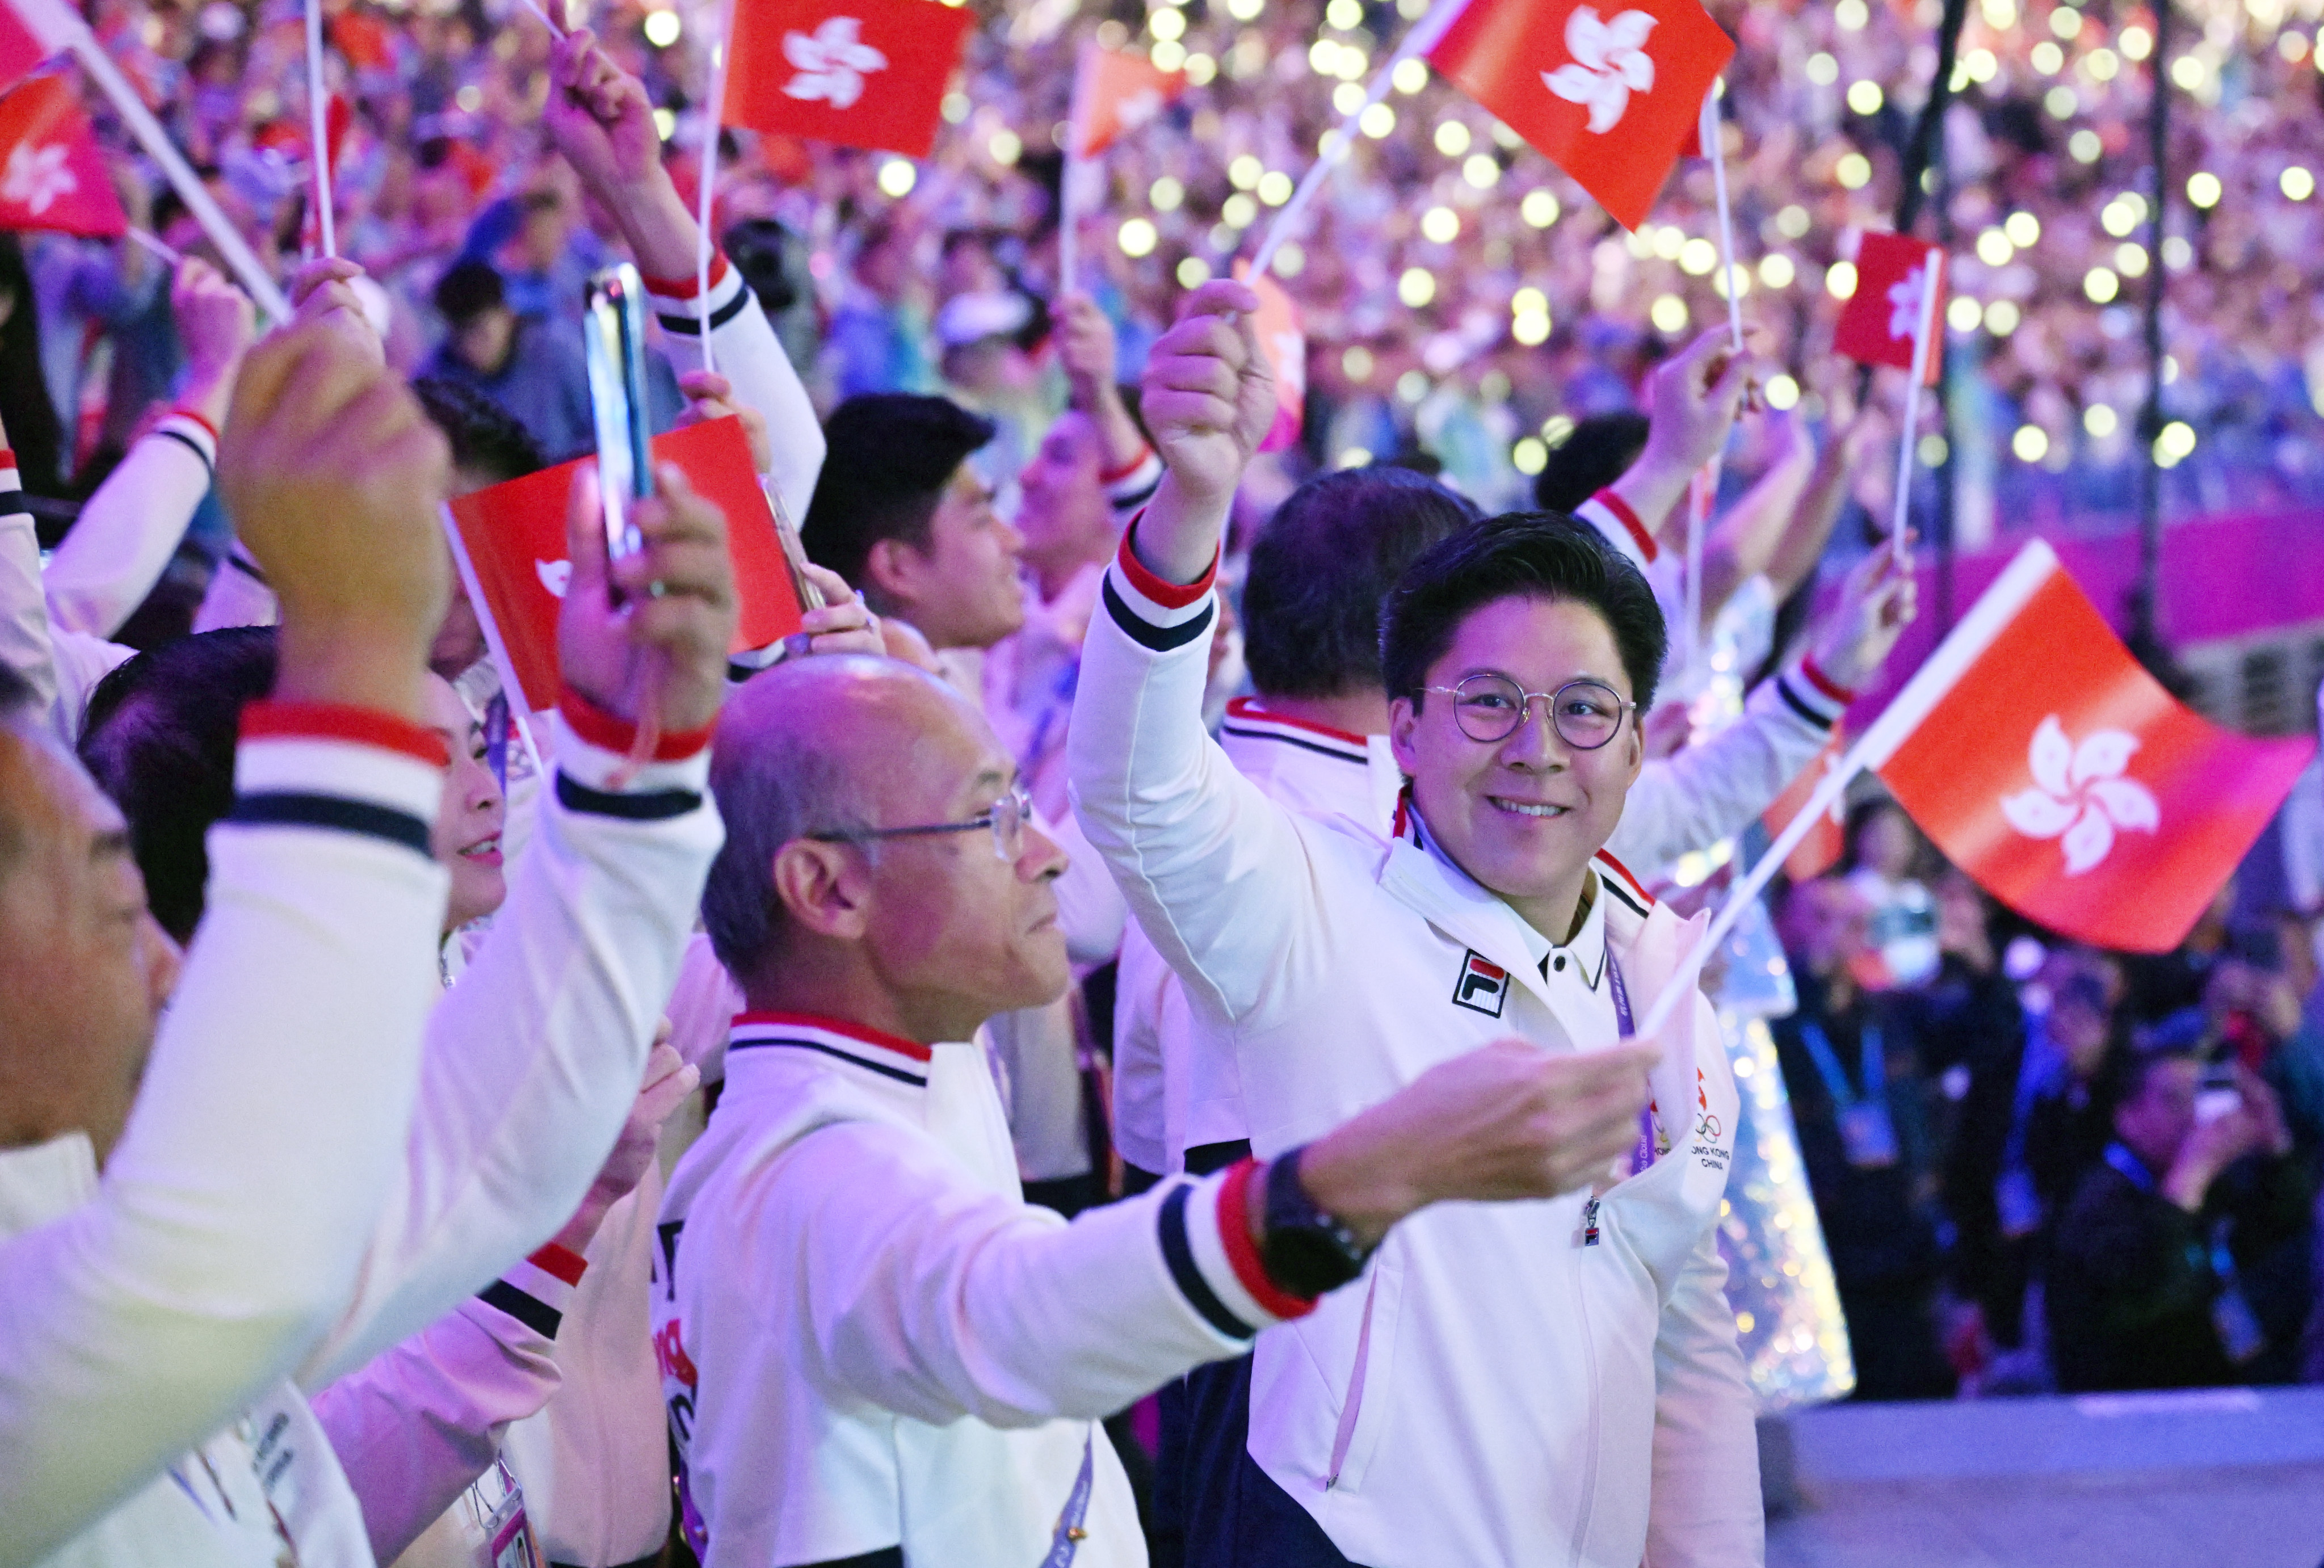 Hong Kong’s delegation enters the Hangzhou Olympic Sports Centre Stadium during the closing ceremony of the Asian Games. Photo: Xinhua